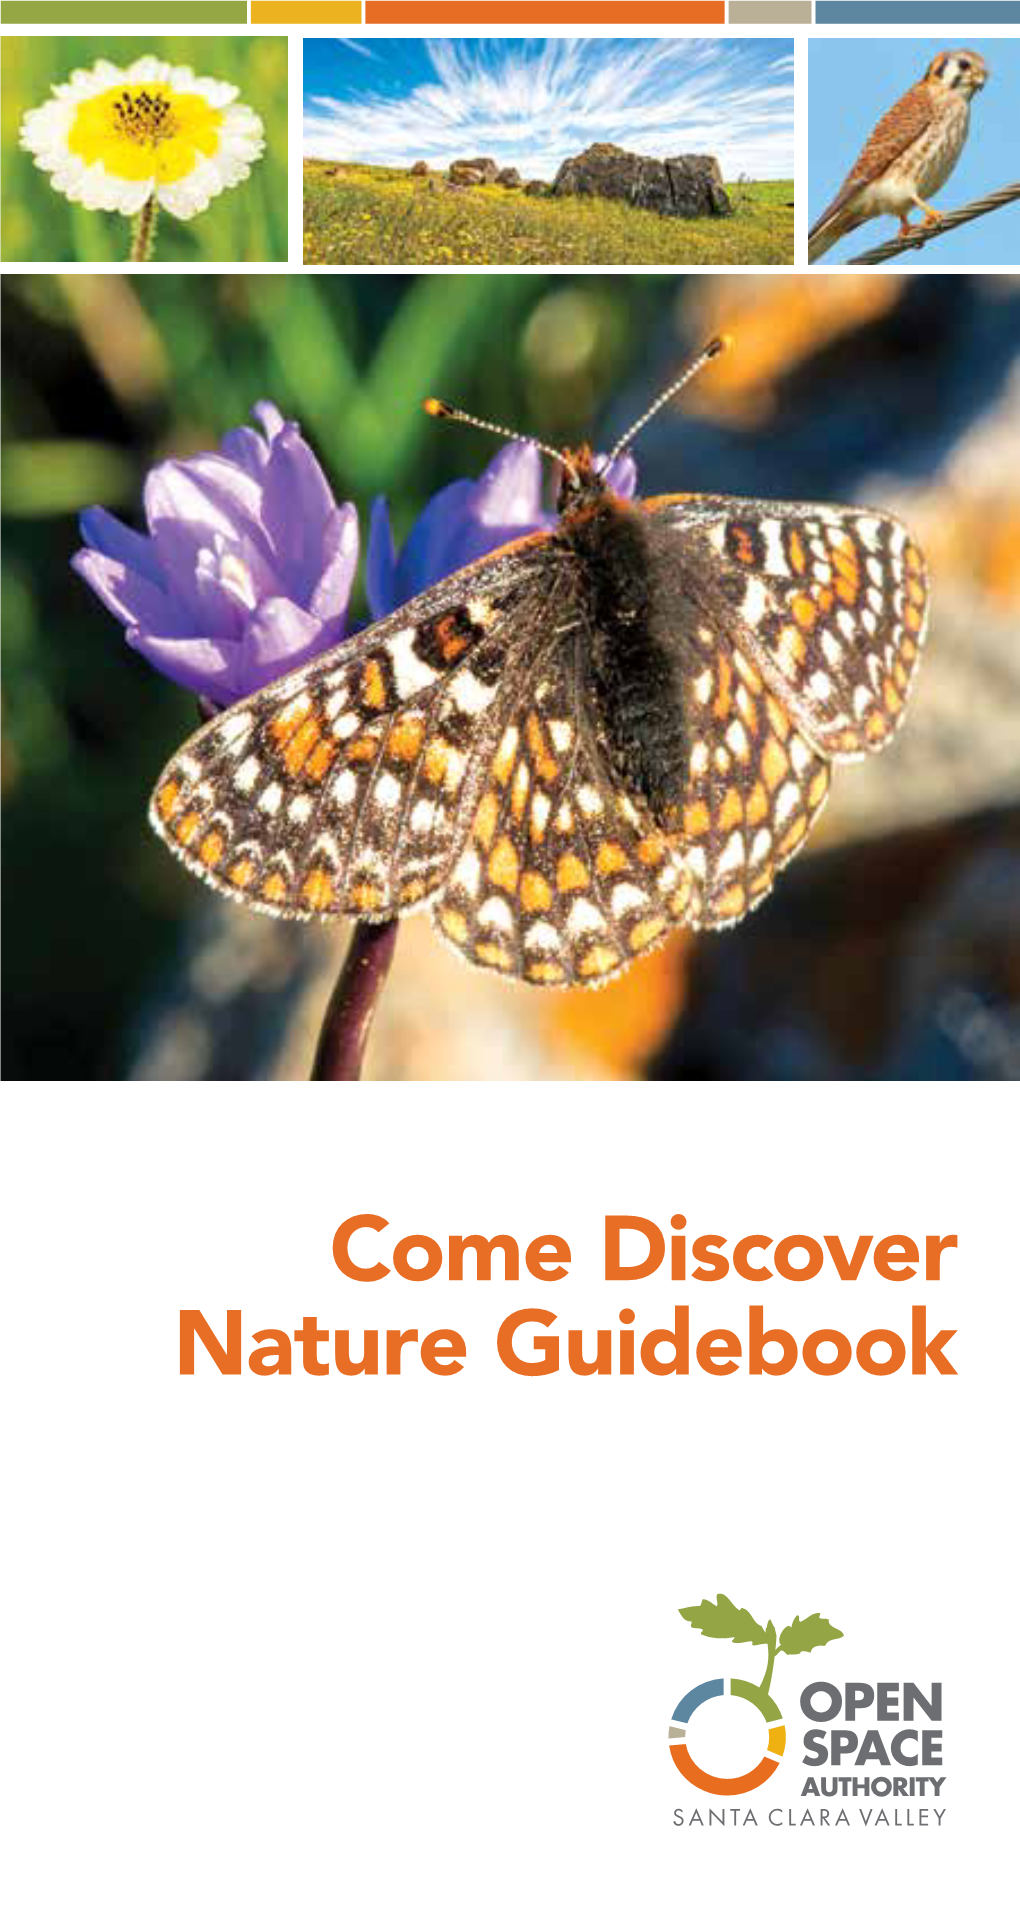 Come Discover Nature Guidebook “This Is Your Open Space, So Come Discover It, Enjoy It, and Help Protect It.” ANDREA MACKENZIE, GENERAL MANAGER